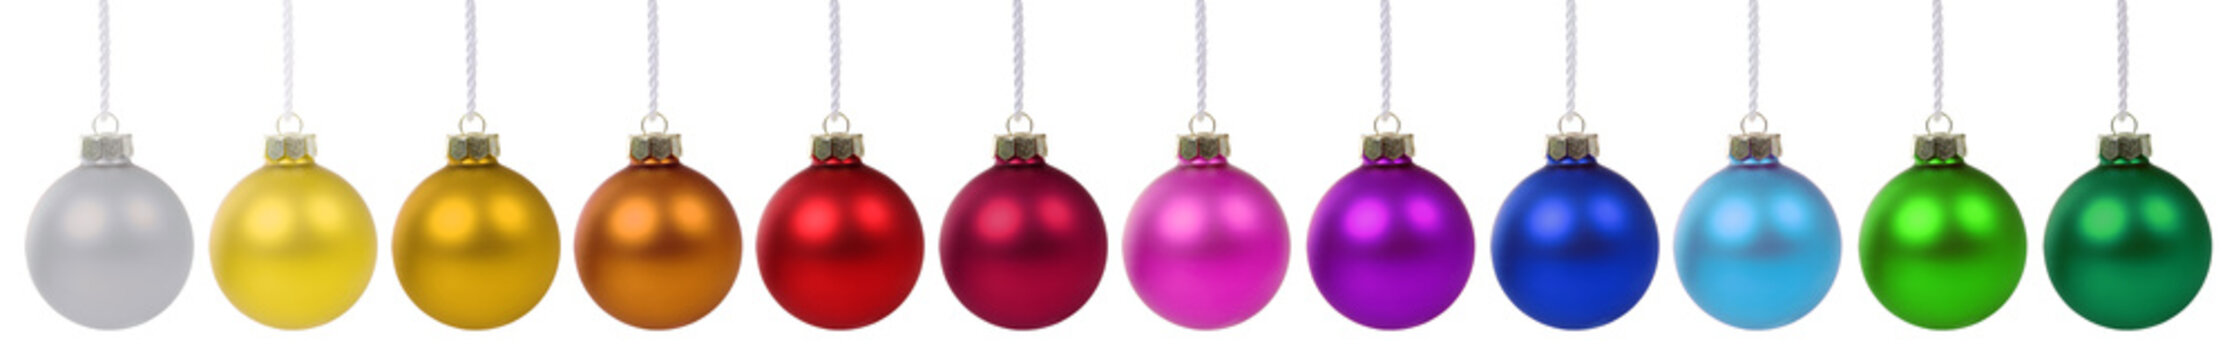 Colorful Christmas balls baubles banner decoration in a row isolated